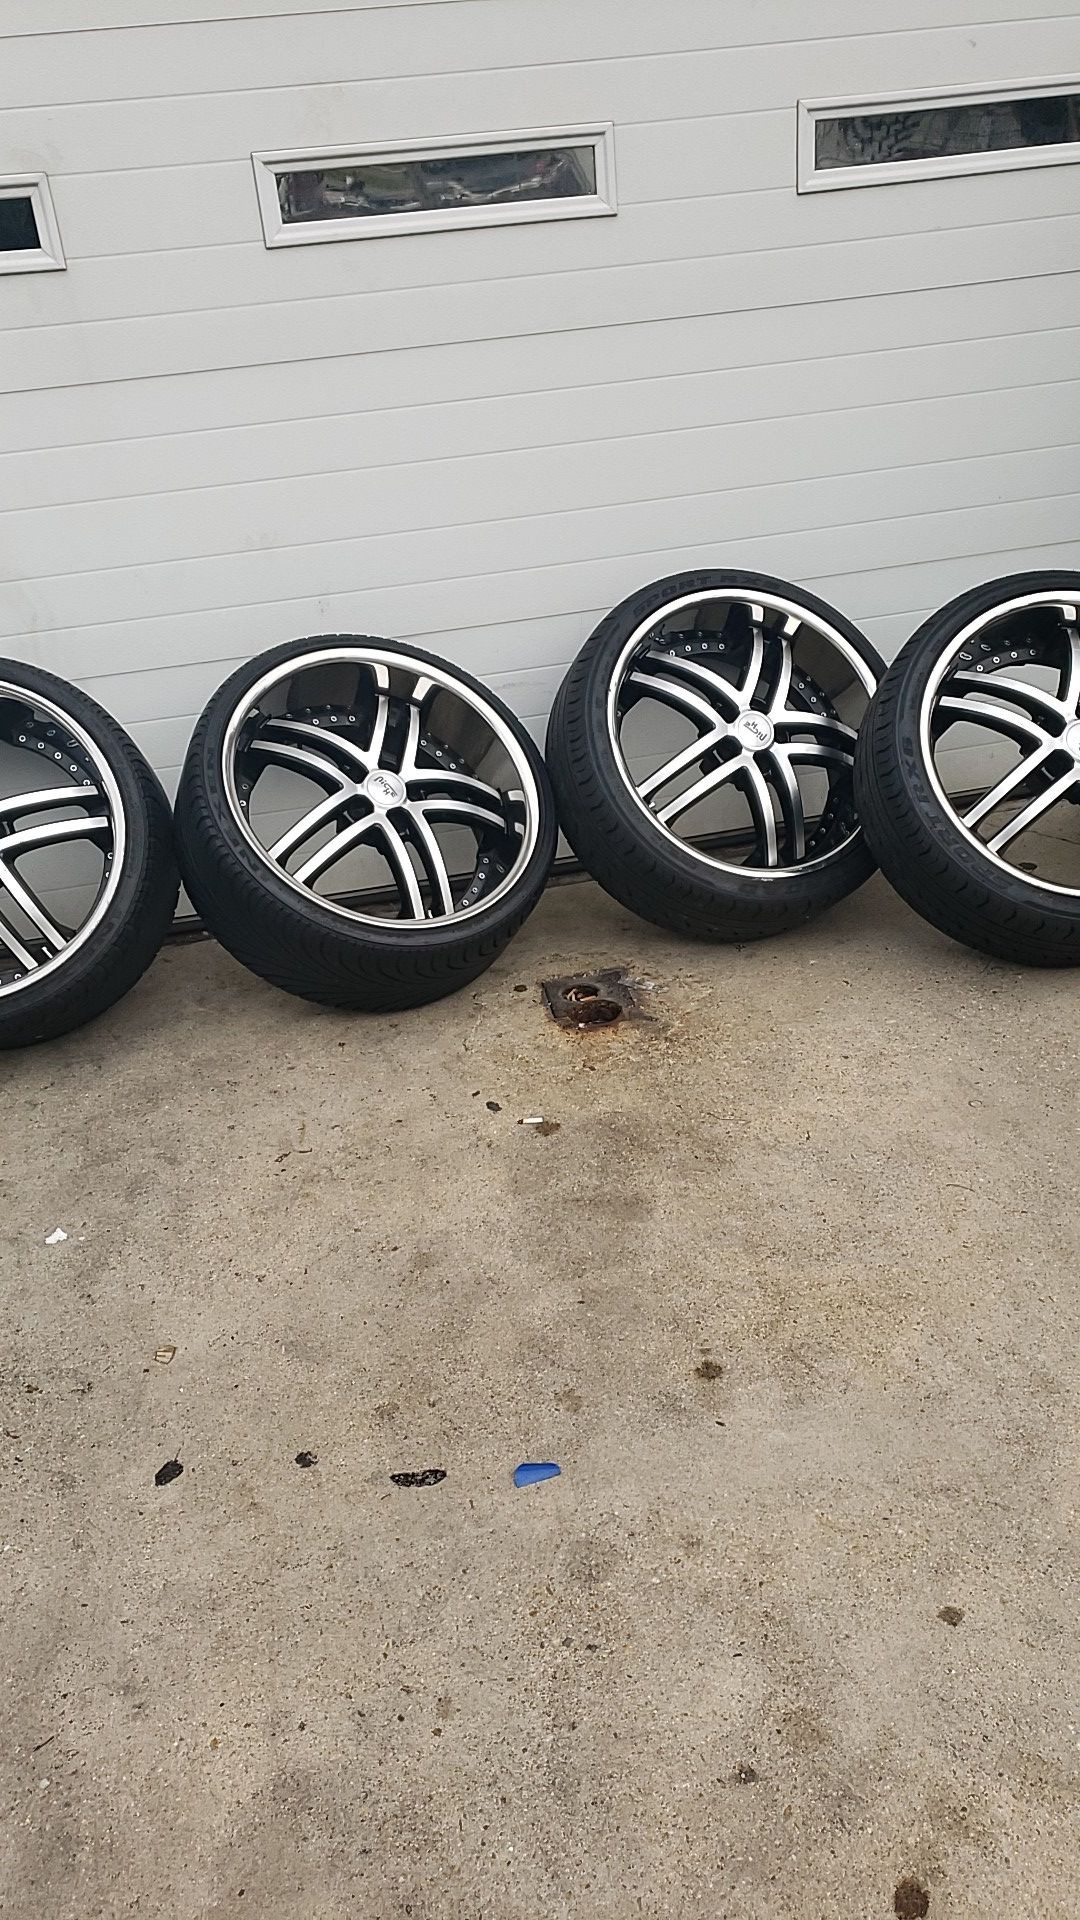 RIMs and Tires